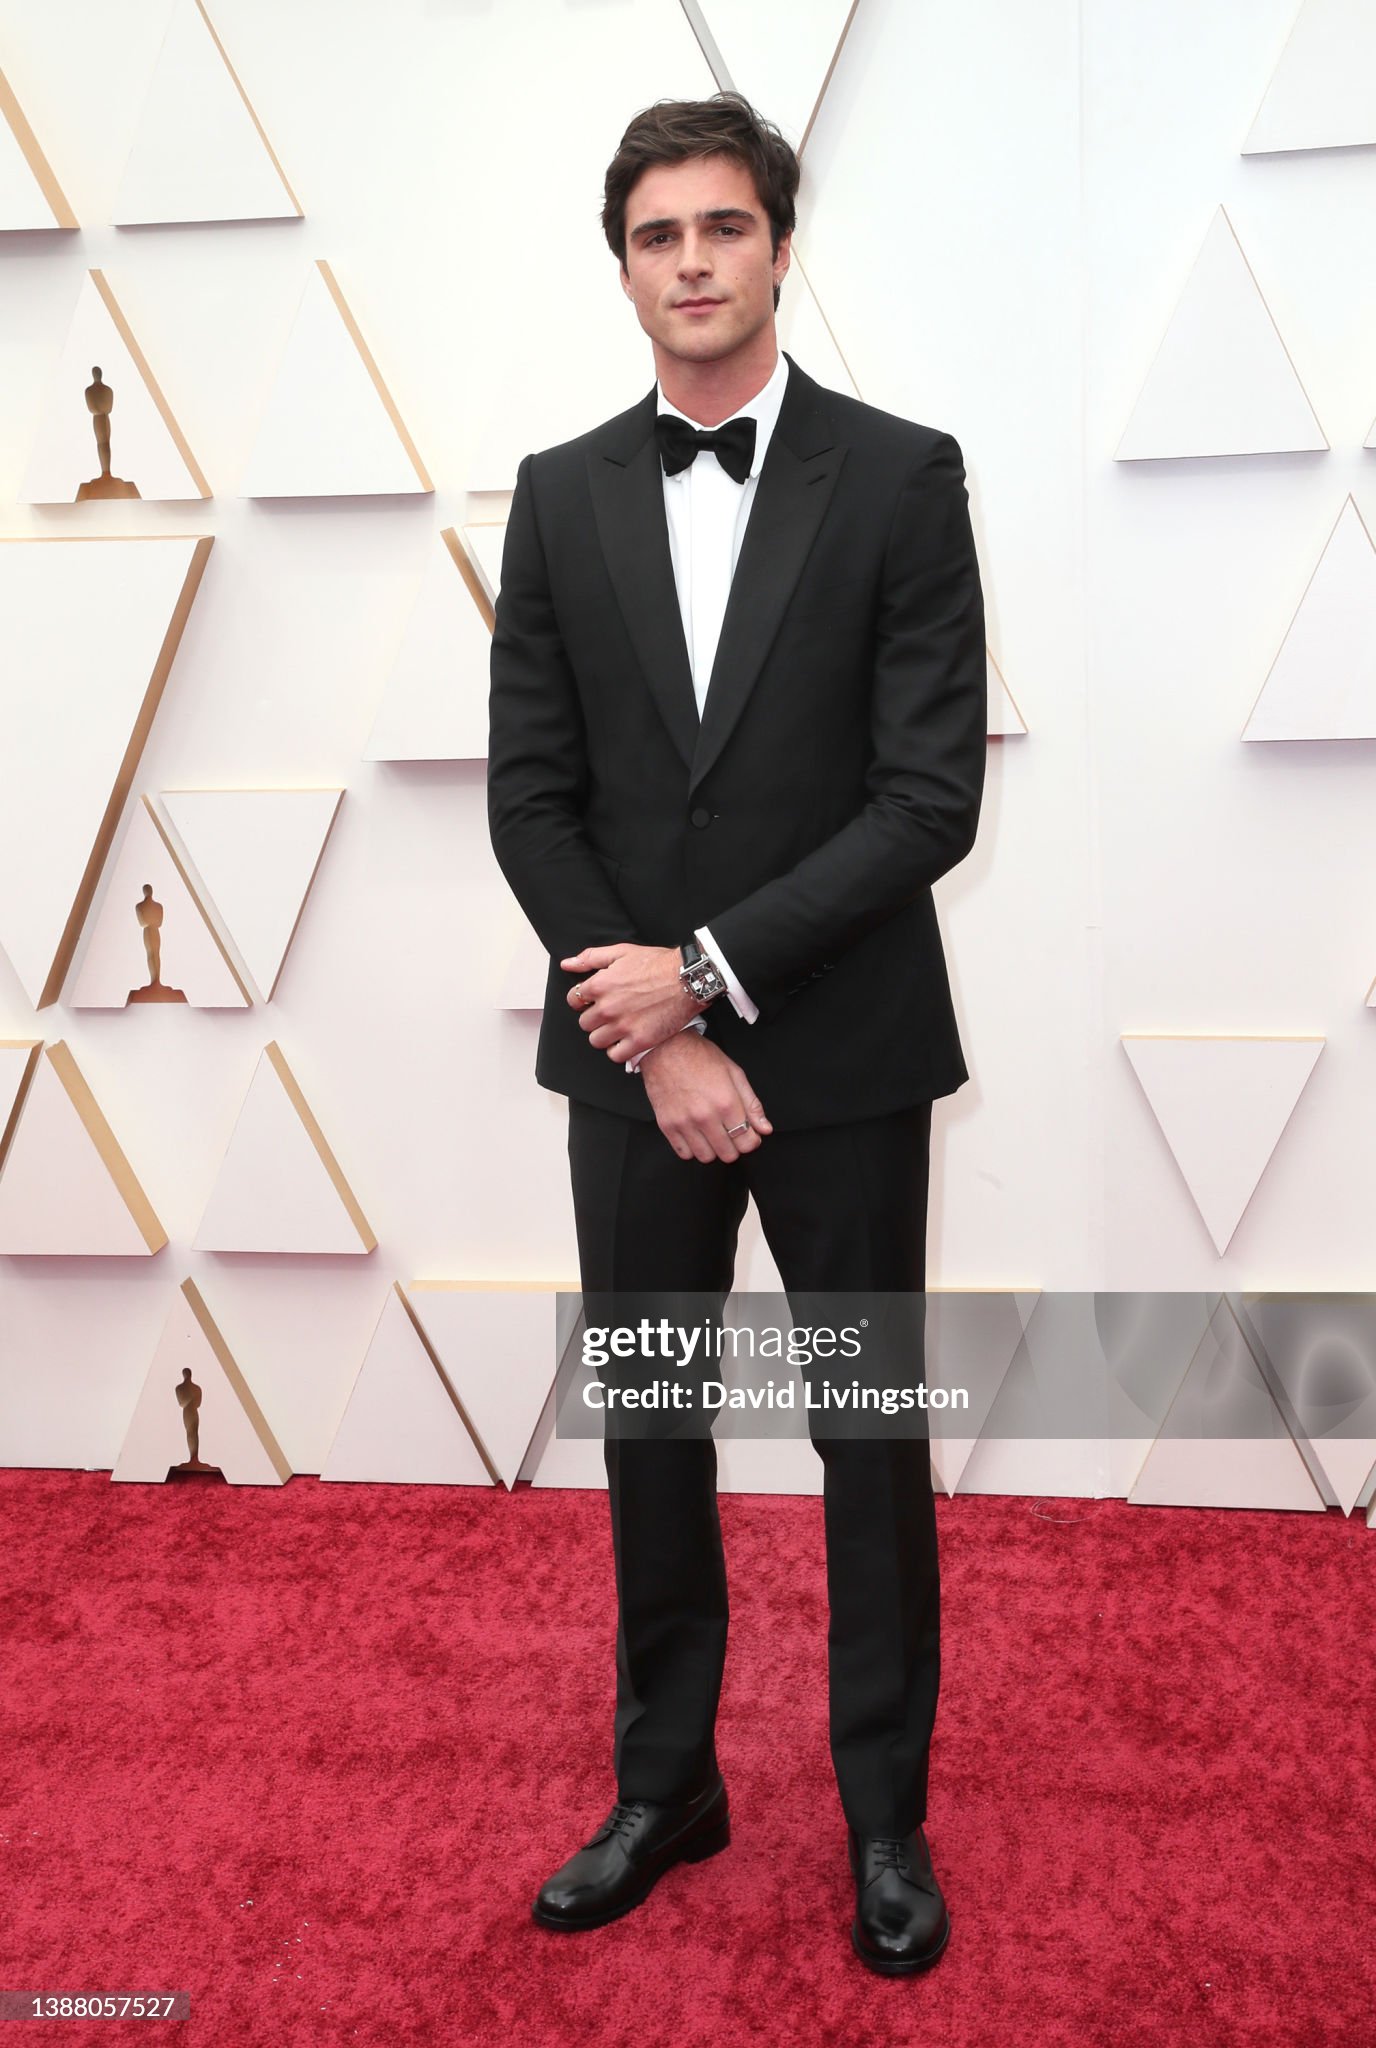 ¿Cuánto mide Jacob Elordi? - Altura - Real height Hollywood-california-jacob-elordi-attends-the-94th-annual-academy-awards-at-hollywood-and